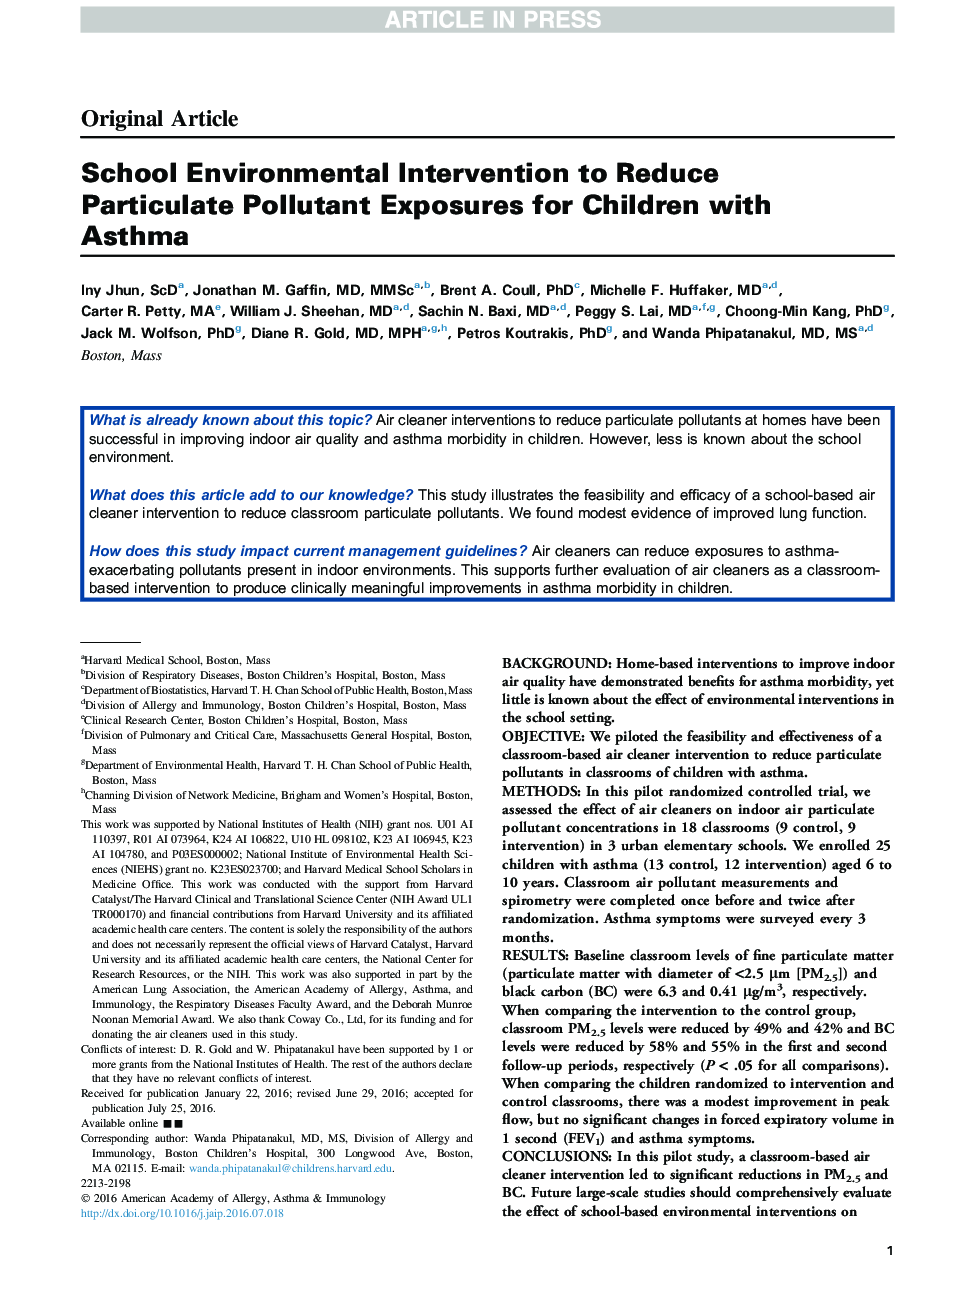 School Environmental Intervention to Reduce Particulate Pollutant Exposures for Children with Asthma